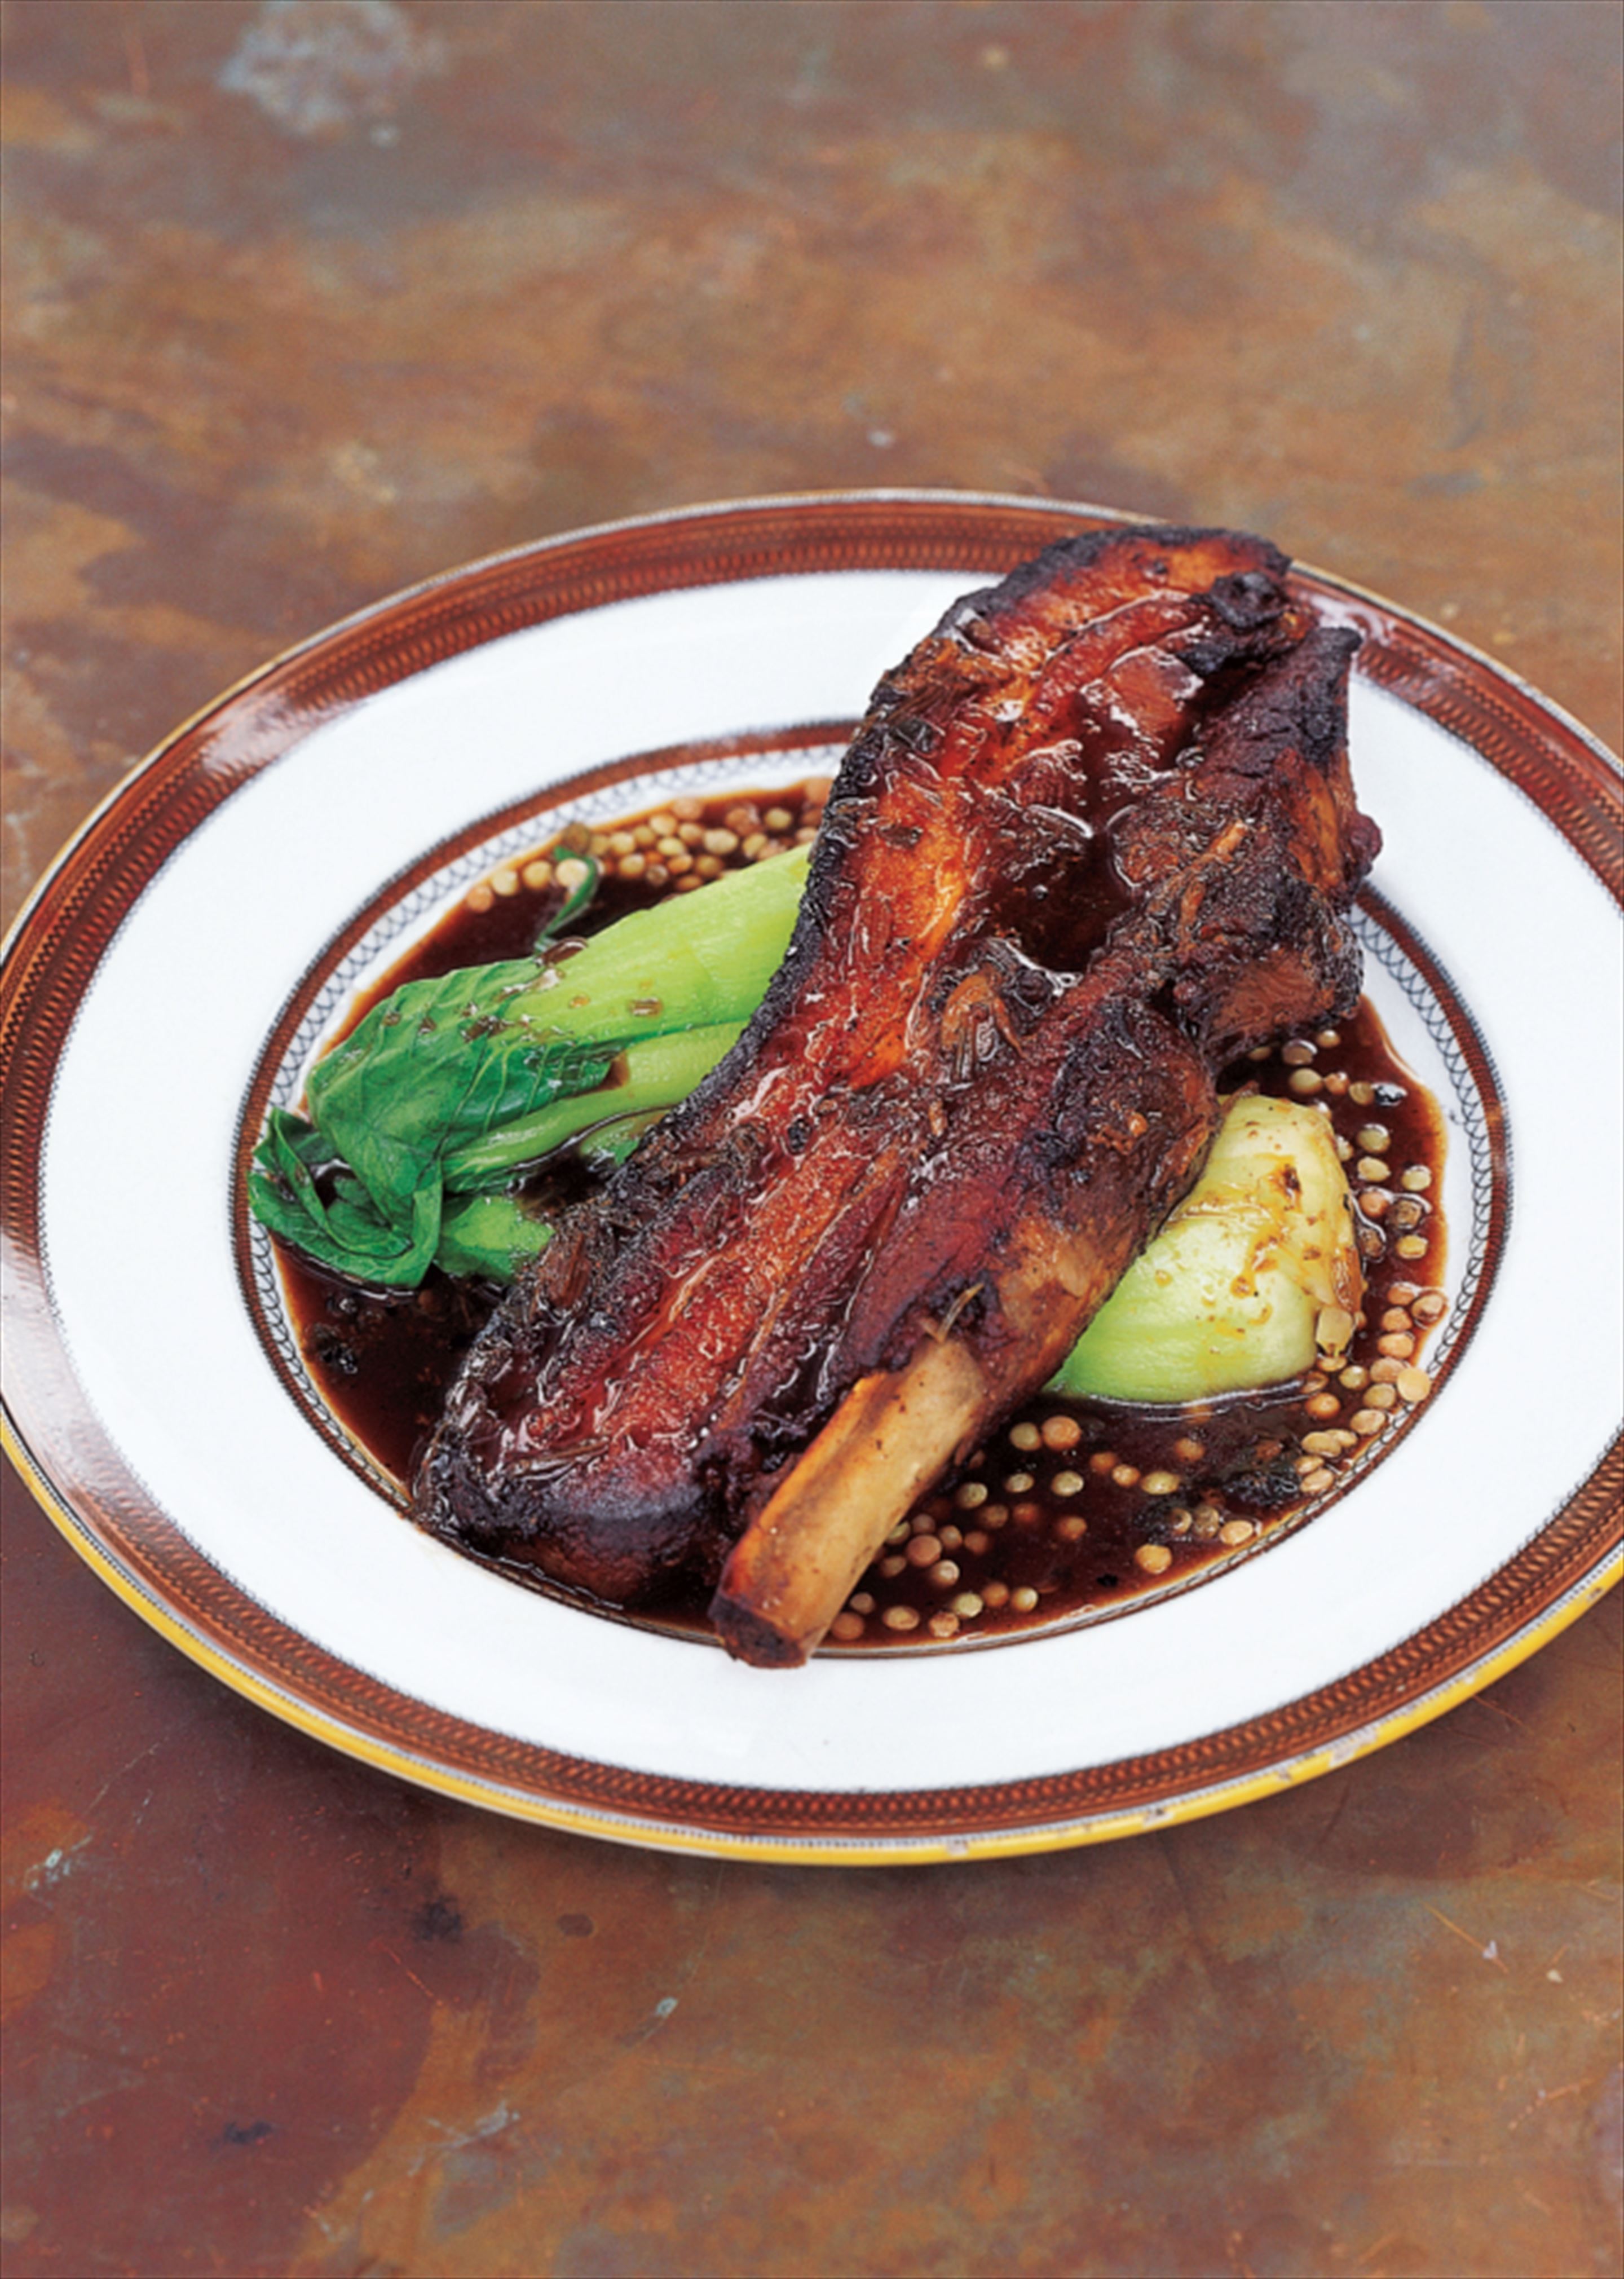 Slow-cooked pork belly with cinnamon, cloves, ginger and star anise